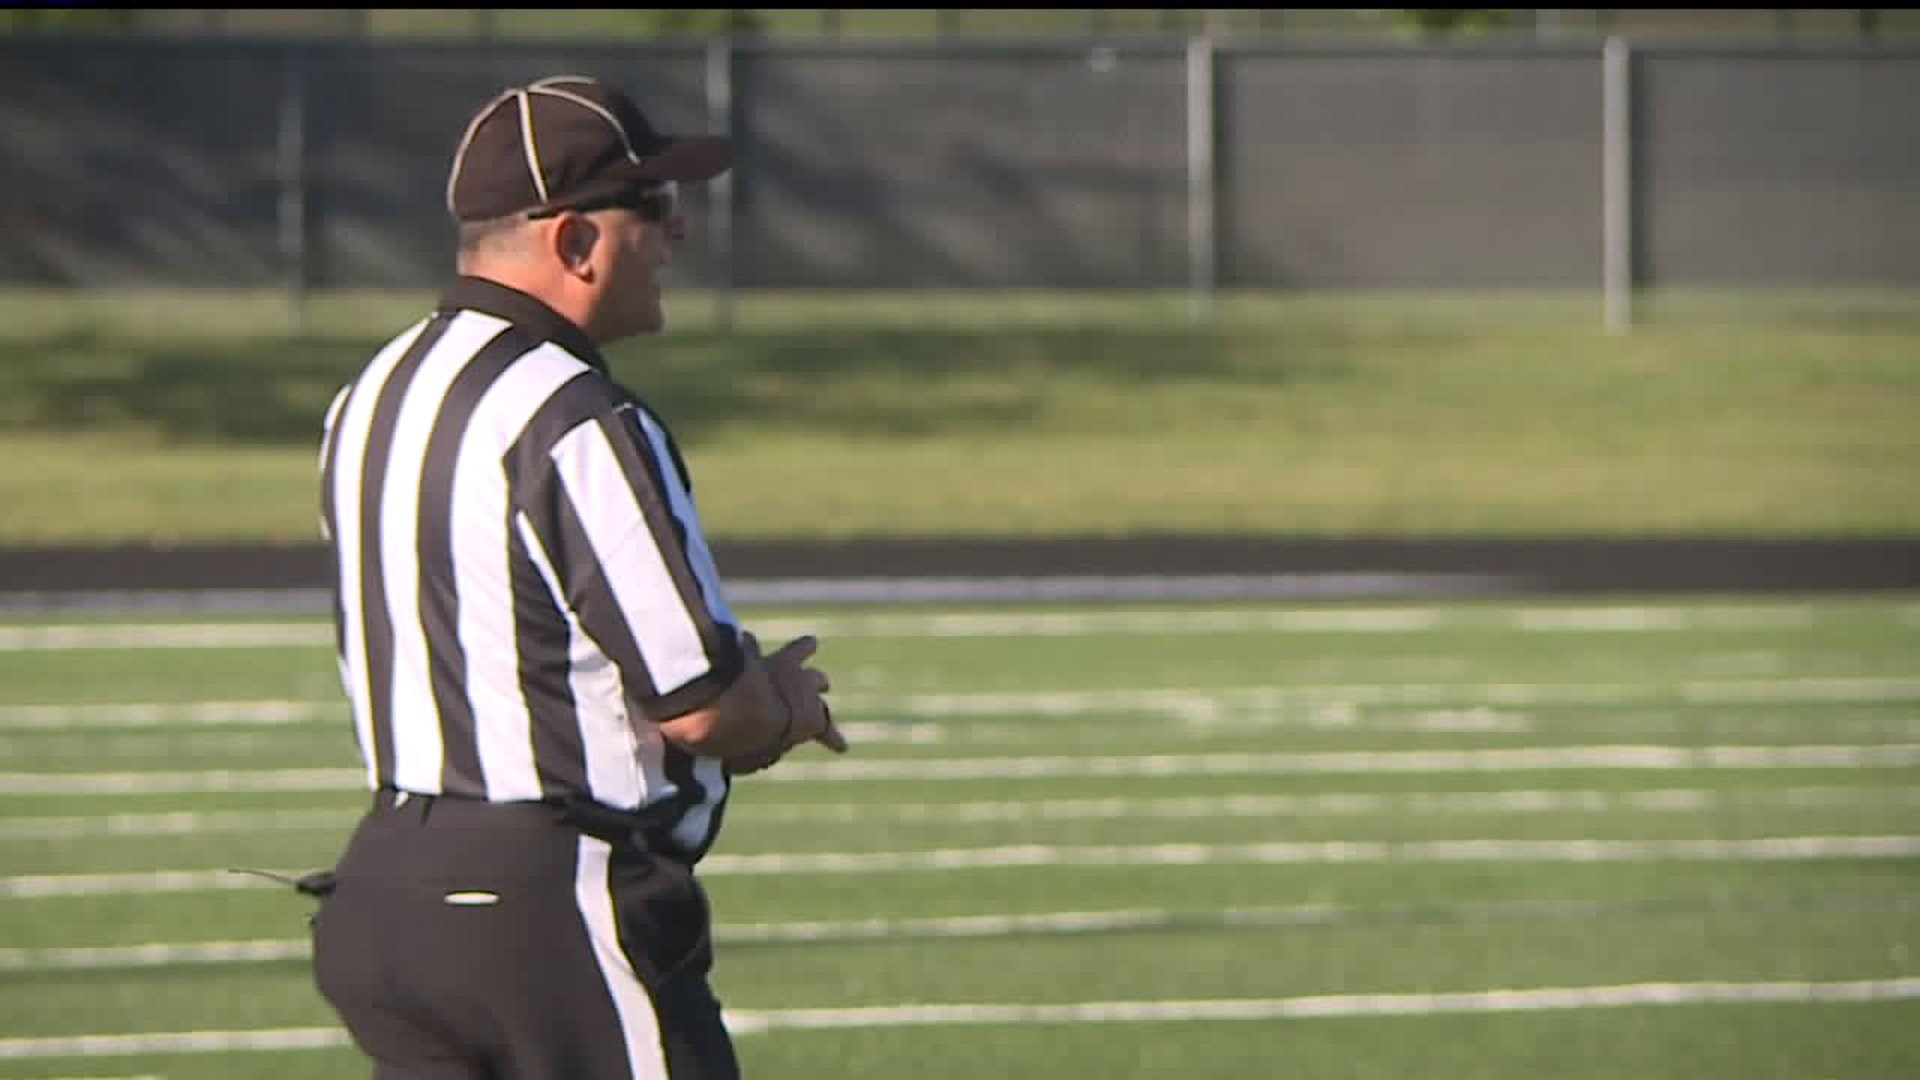 Let`s Move Quad Cities: A referee receives knee replacement